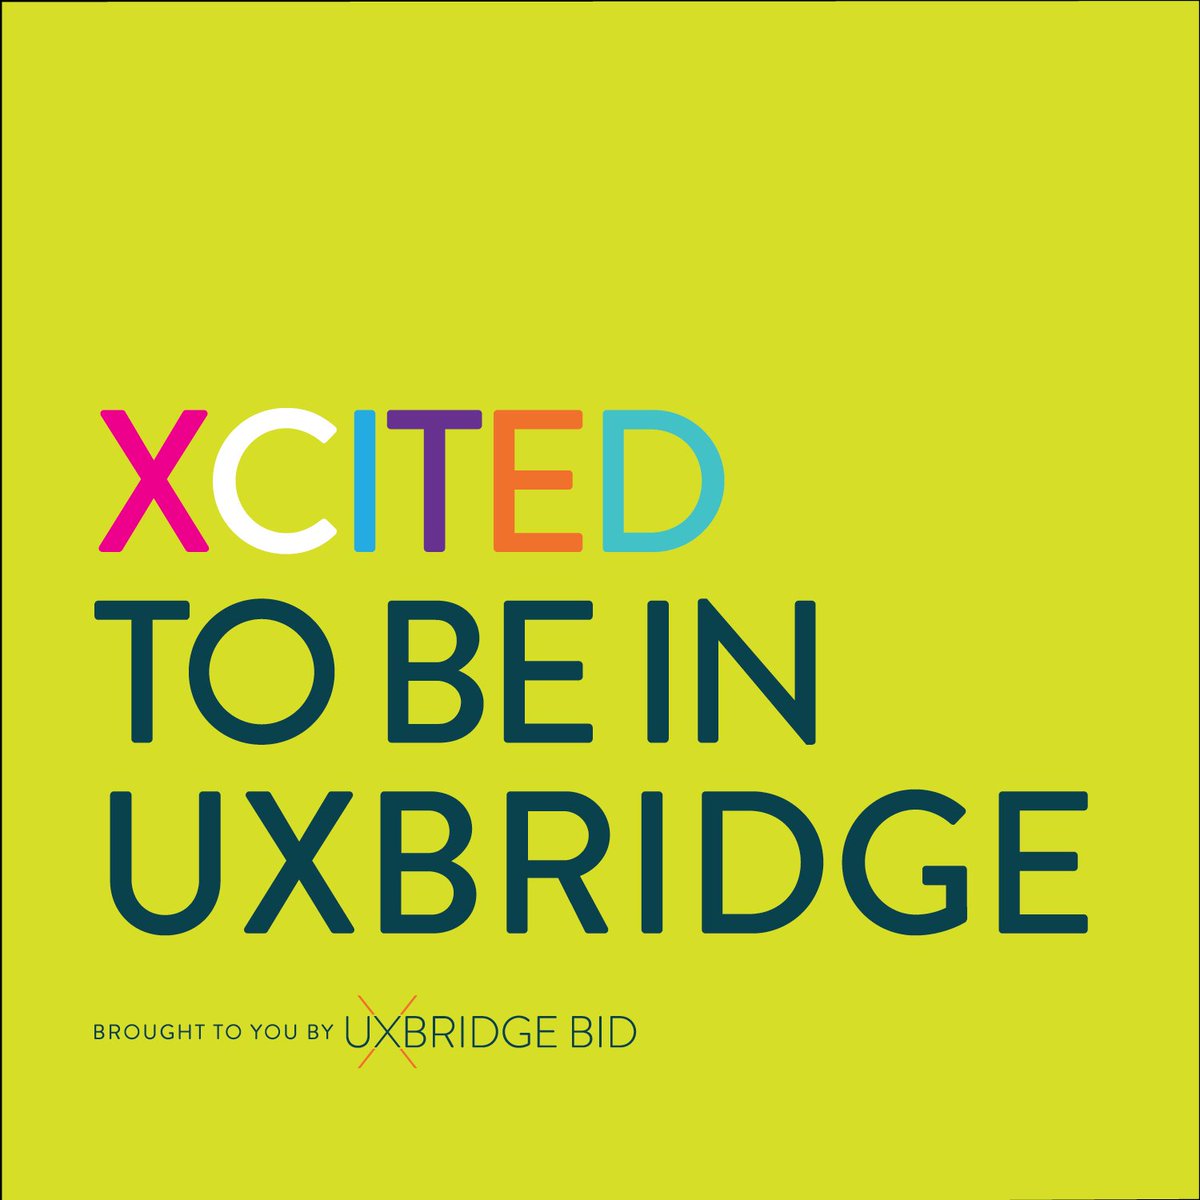 Welcome to Uxbridge freshers! Here at Uxbridge BID (Love Uxbridge) our aim is to make Uxbridge town an even better, happier, safer place to study, shop, live and work! For more information click here: loveuxbridge.co.uk/students Brunel University London 🧡💛❤️💜💚💙